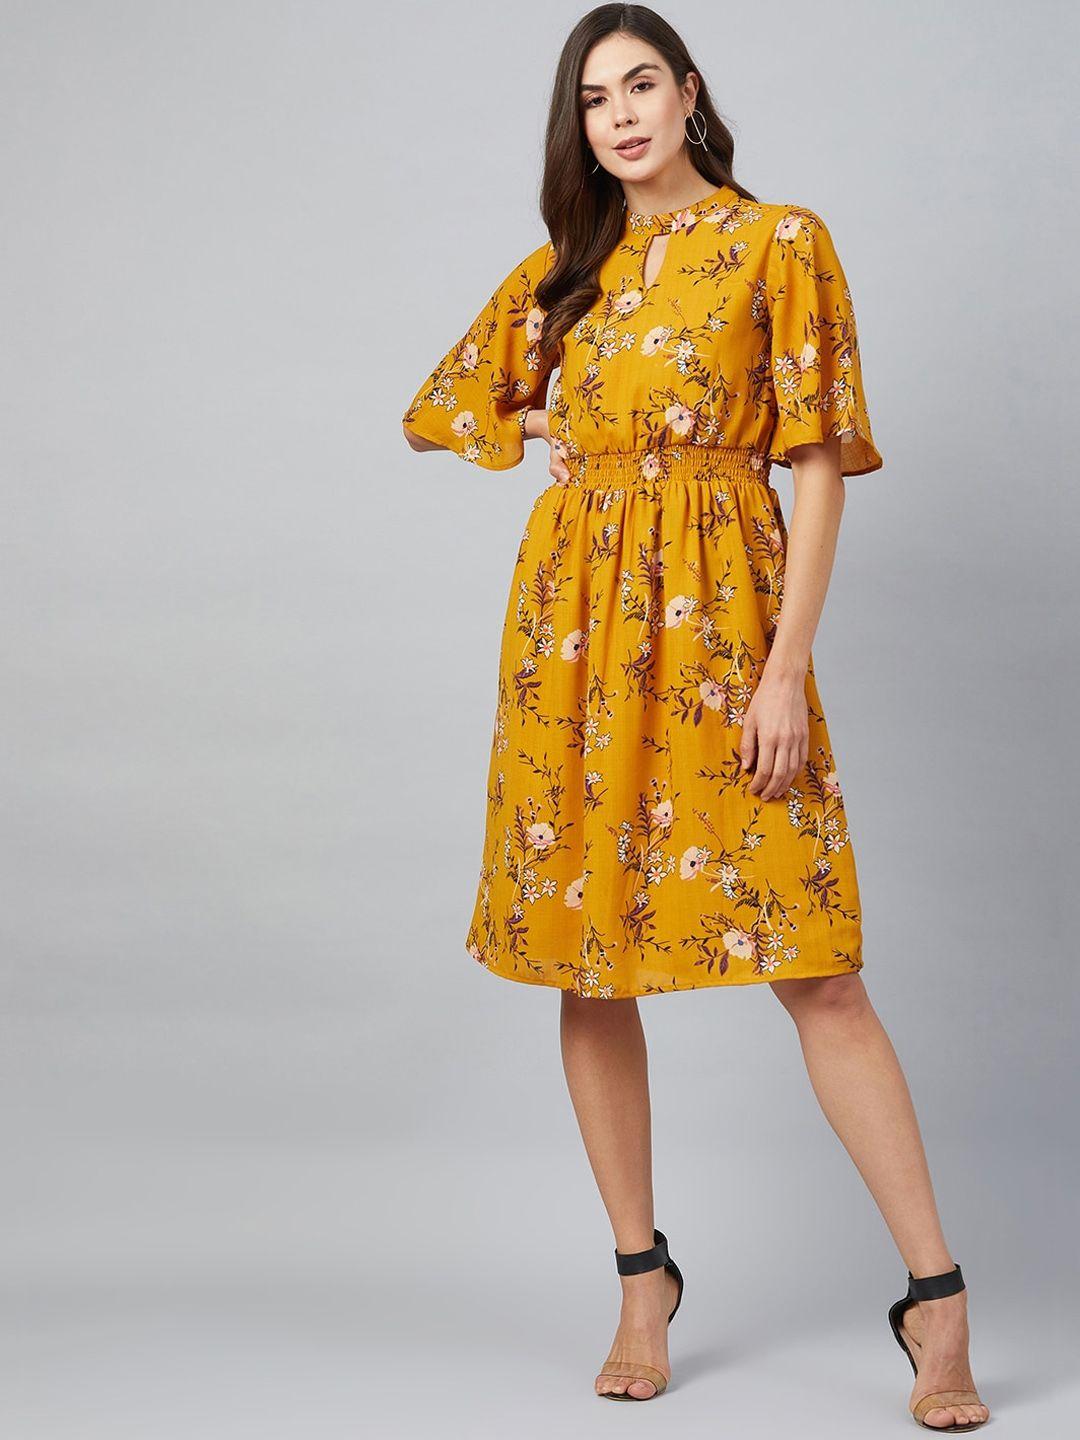 marie claire women mustard yellow printed a-line dress